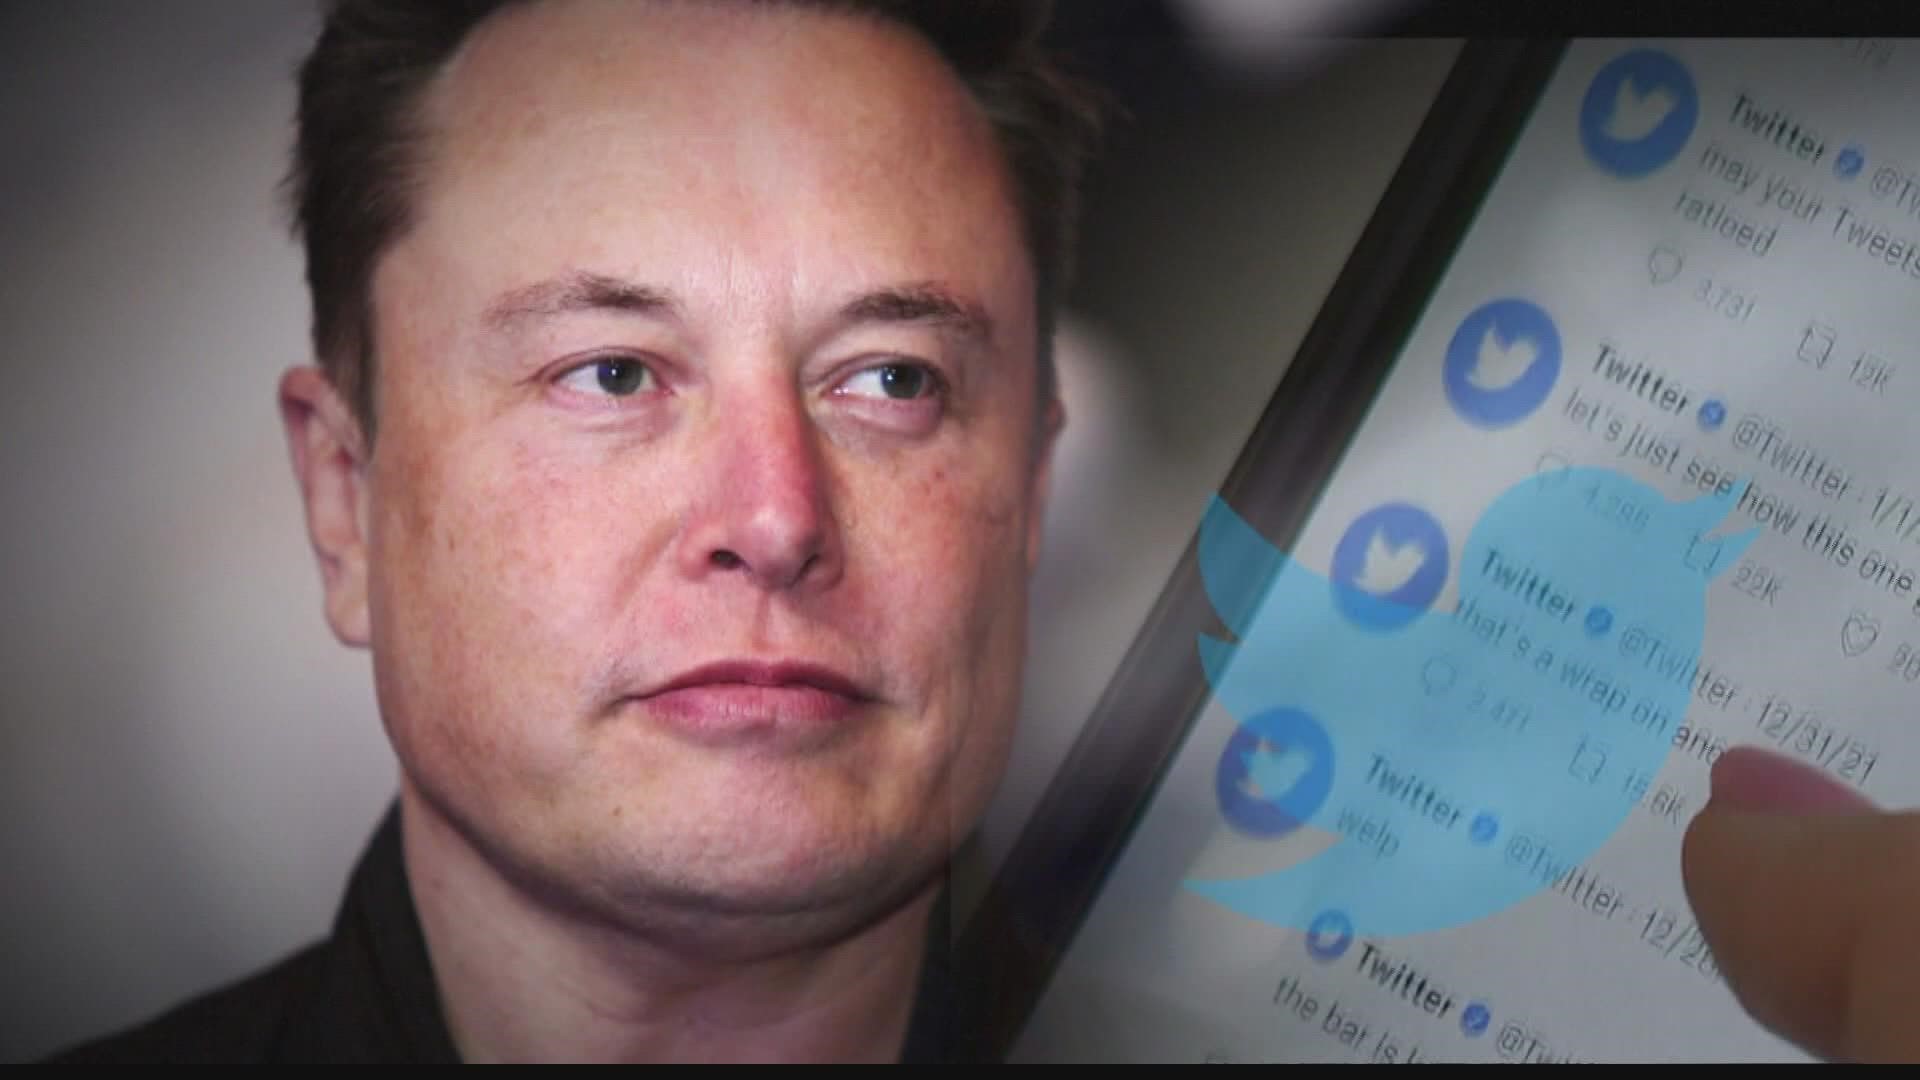 Elon Musk's offer to buy Twitter was accepted this week.